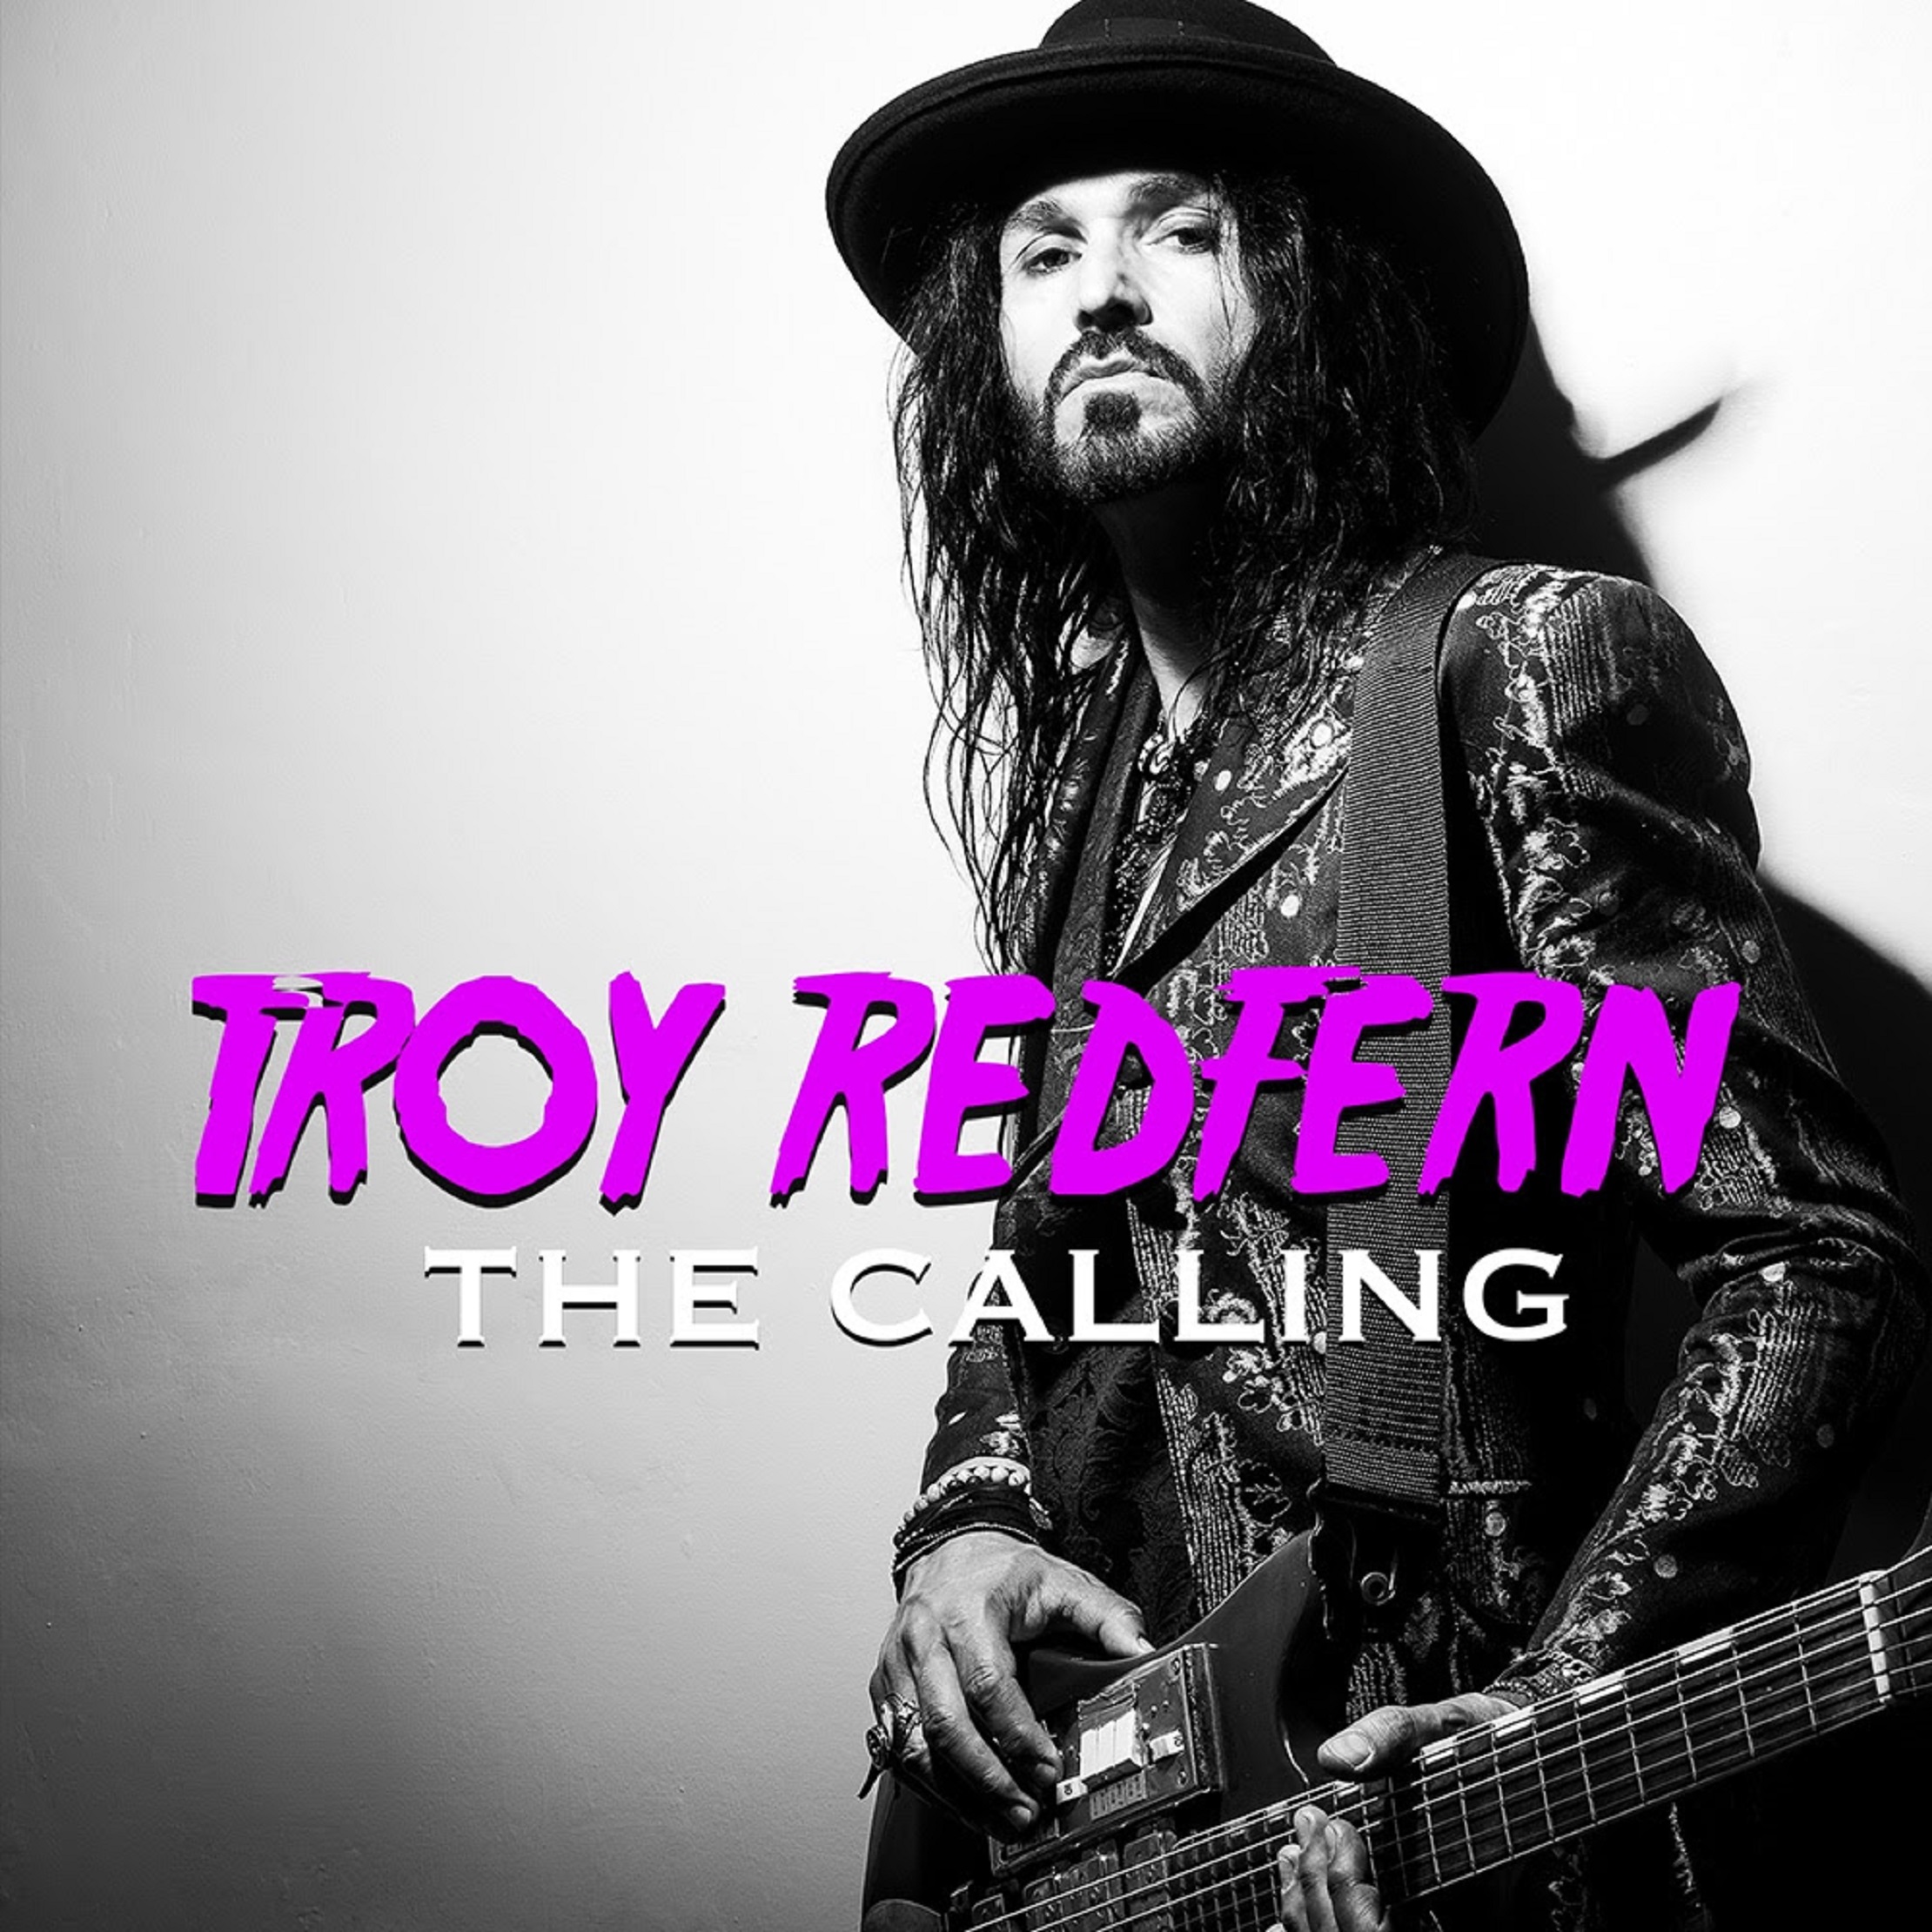 Troy Redfern releases "The Calling" single ahead of Headline UK Tour